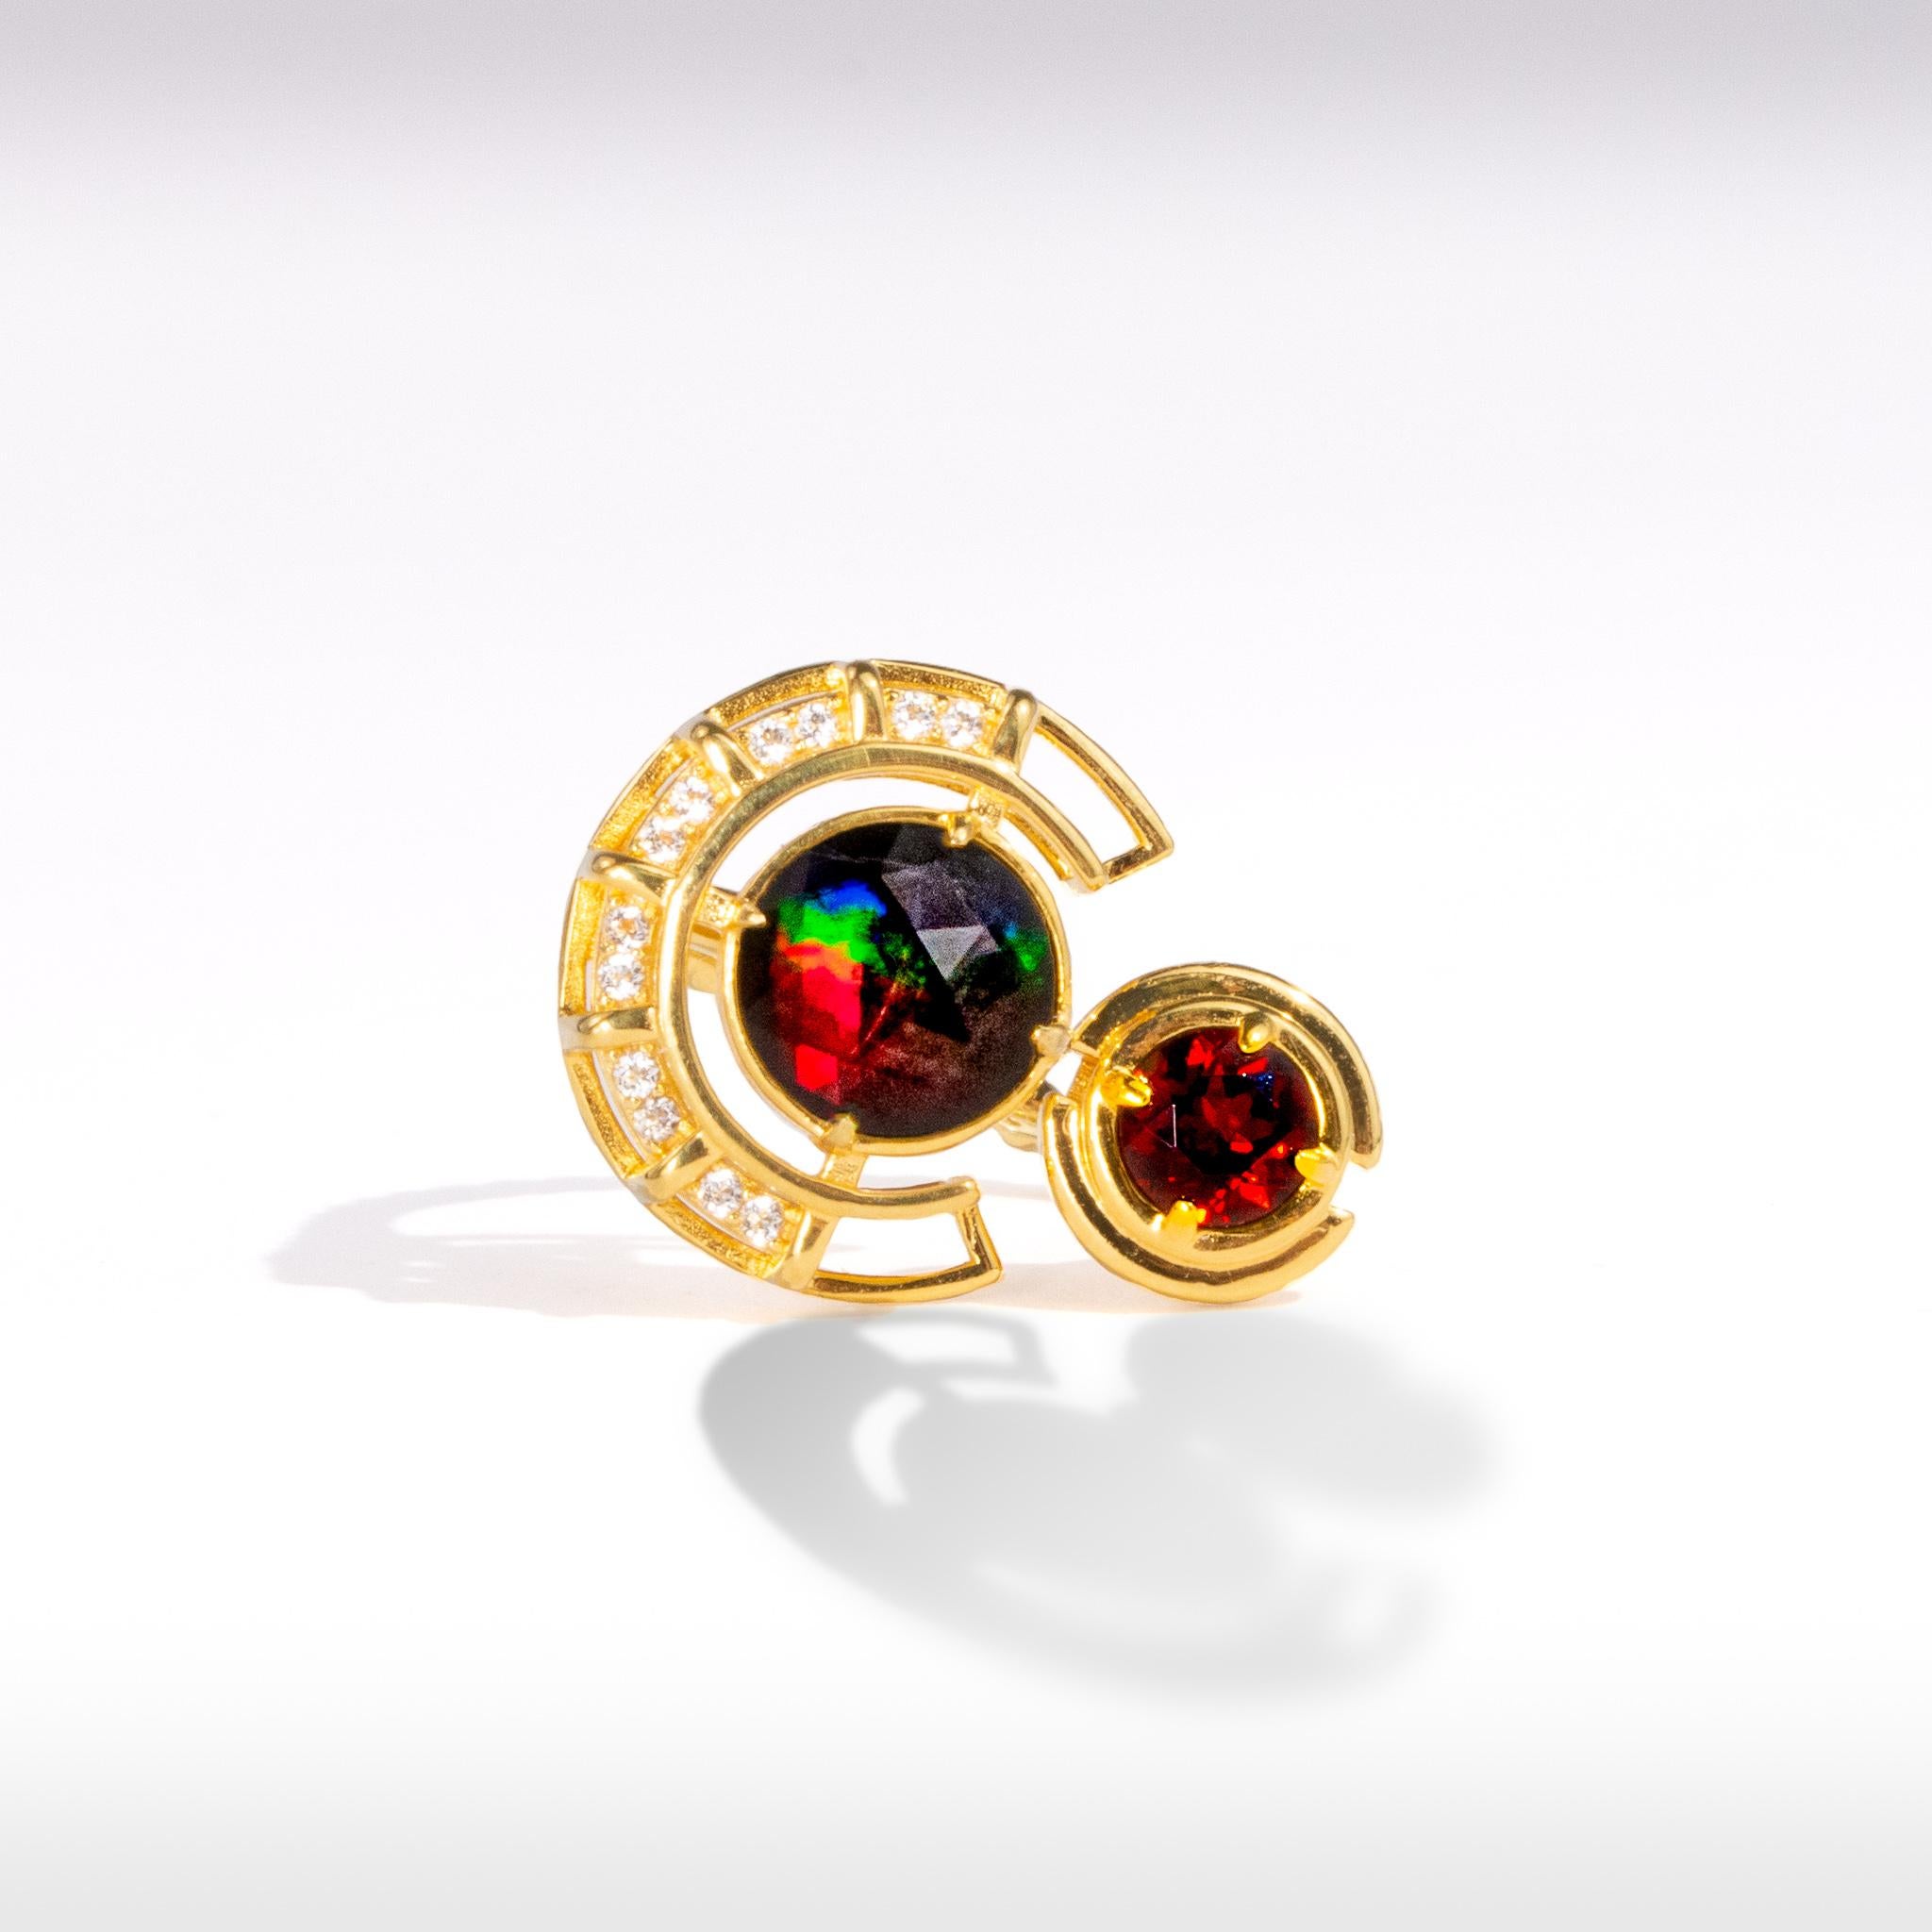 Product Details:

The Prosperity Collection celebrating the Chinese new year was inspired by the Chinese symbol for prosperity, bringing good fortune to all who wear it.

Faceted A grade Ammolite
8mm Round Ammolite Ring
18K gold vermeil
Accented